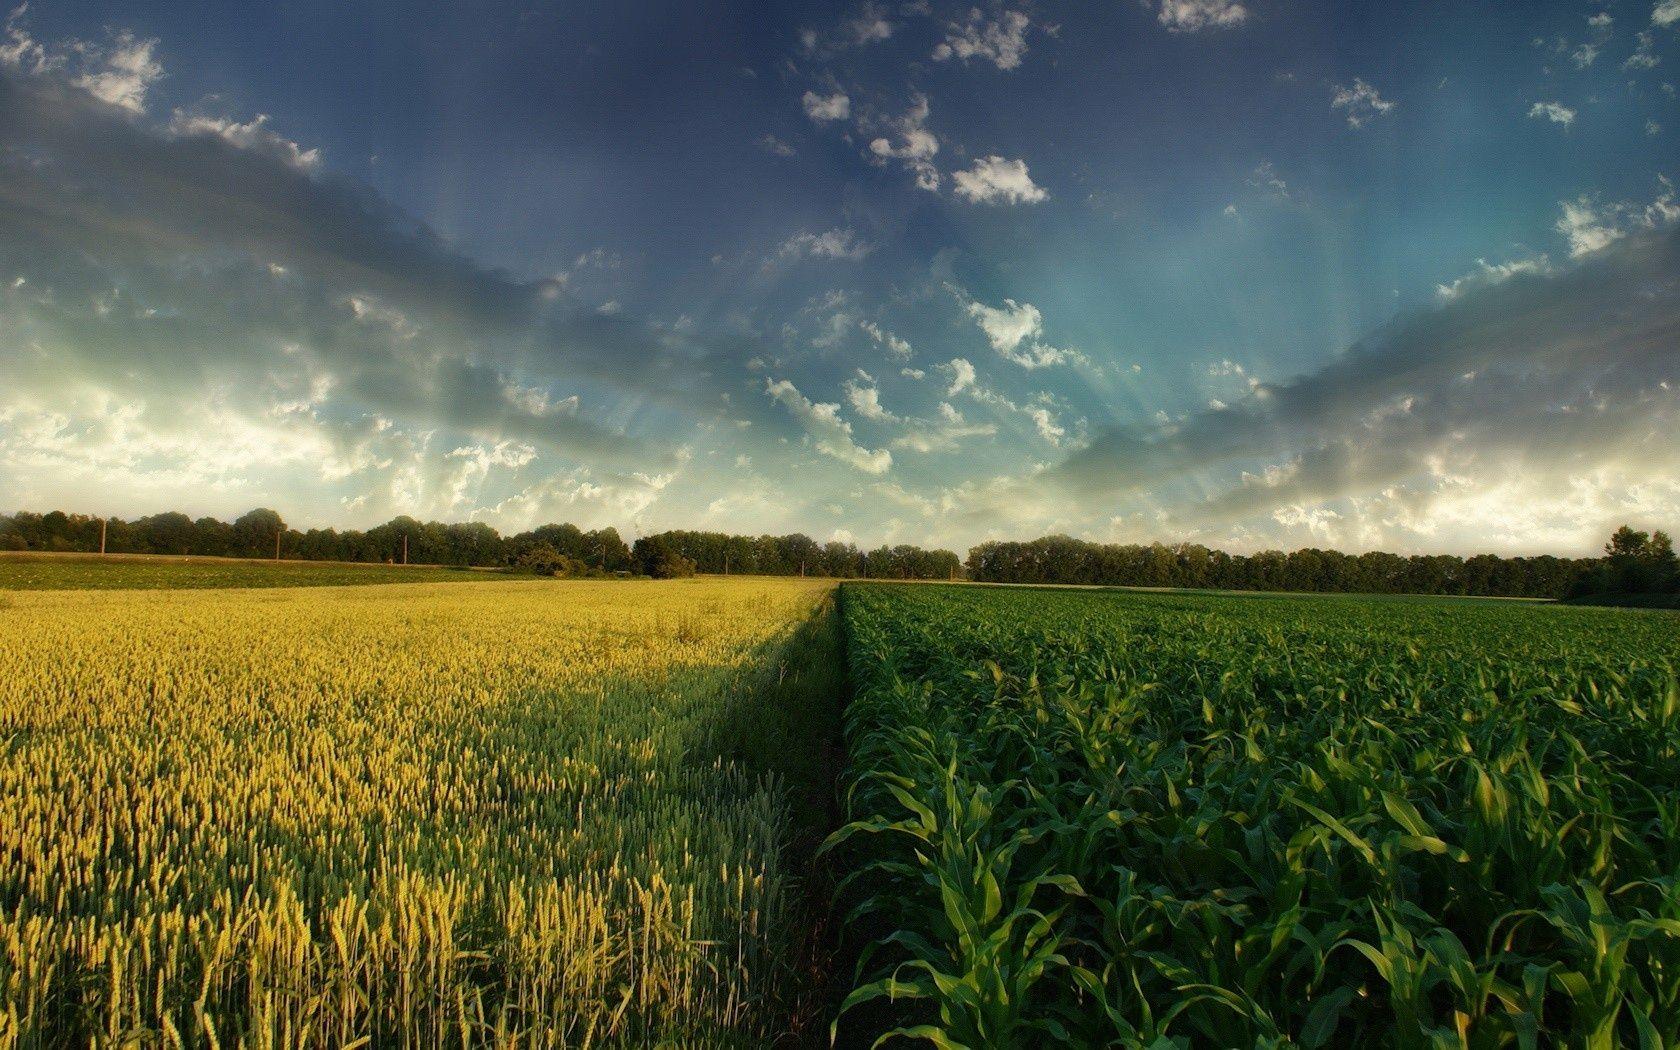 Corn and wheat crops desktop wallpapers 1400x1050, Corn and wheat